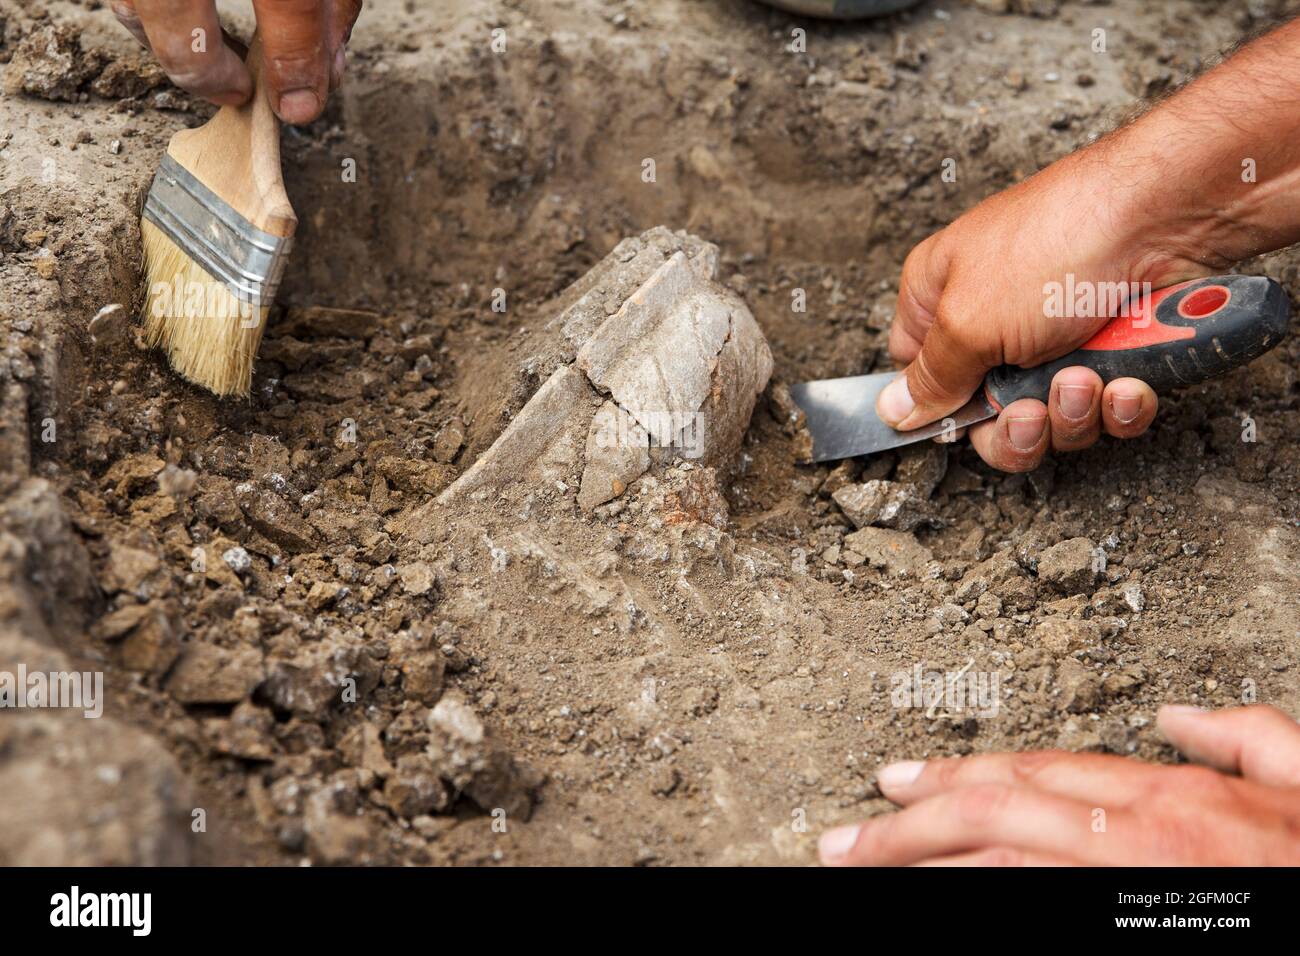 Archaeological excavations, archaeologists work, dig up an ancient clay artifact with special tools in soil Stock Photo